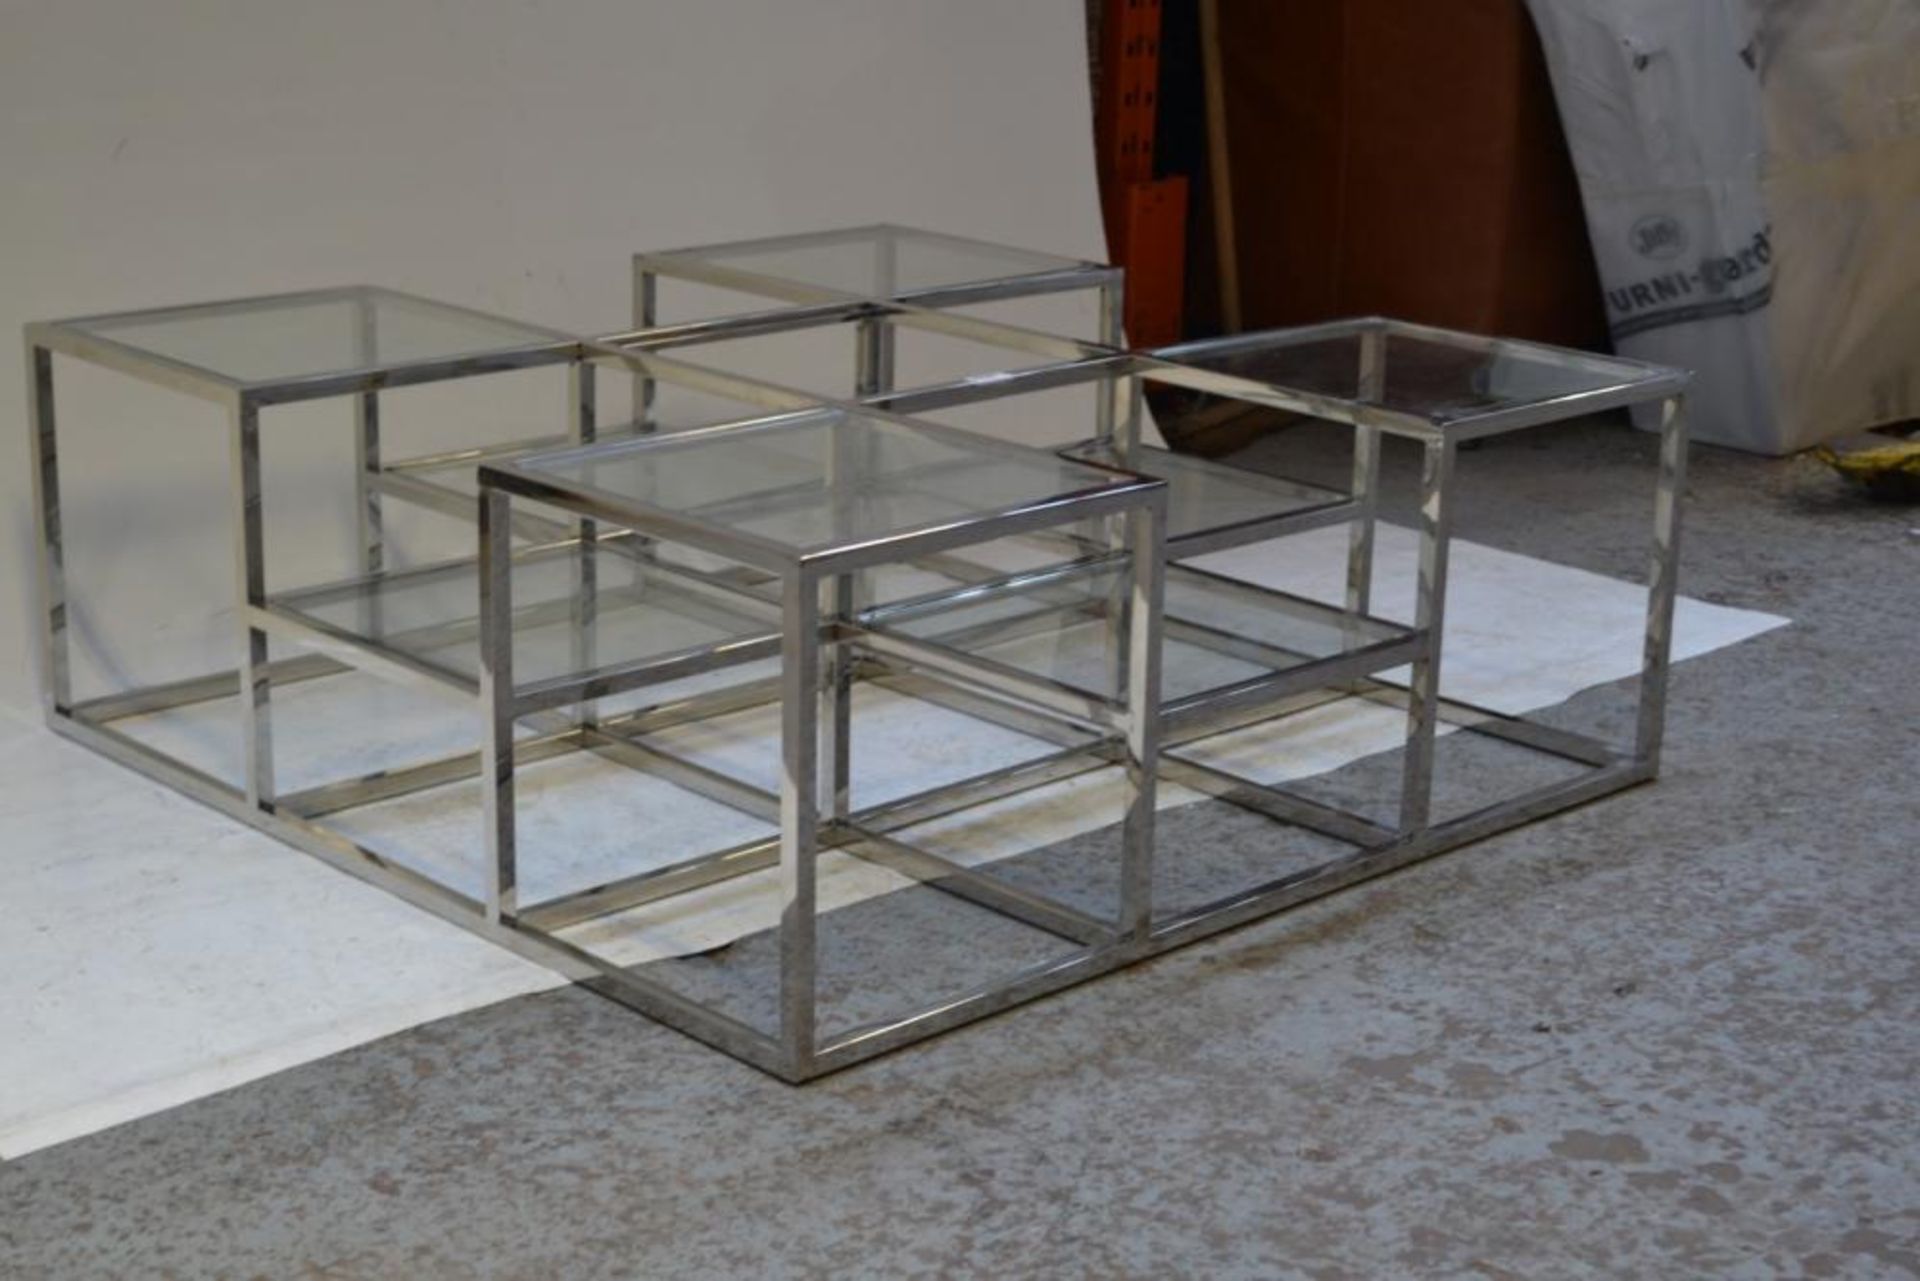 1 x EX DISPLAY METAL AND GLASS MULTI COFFEE TABLE - CL364 - Ref:WH- J2287 - Location: Altrincham WA1 - Image 4 of 4